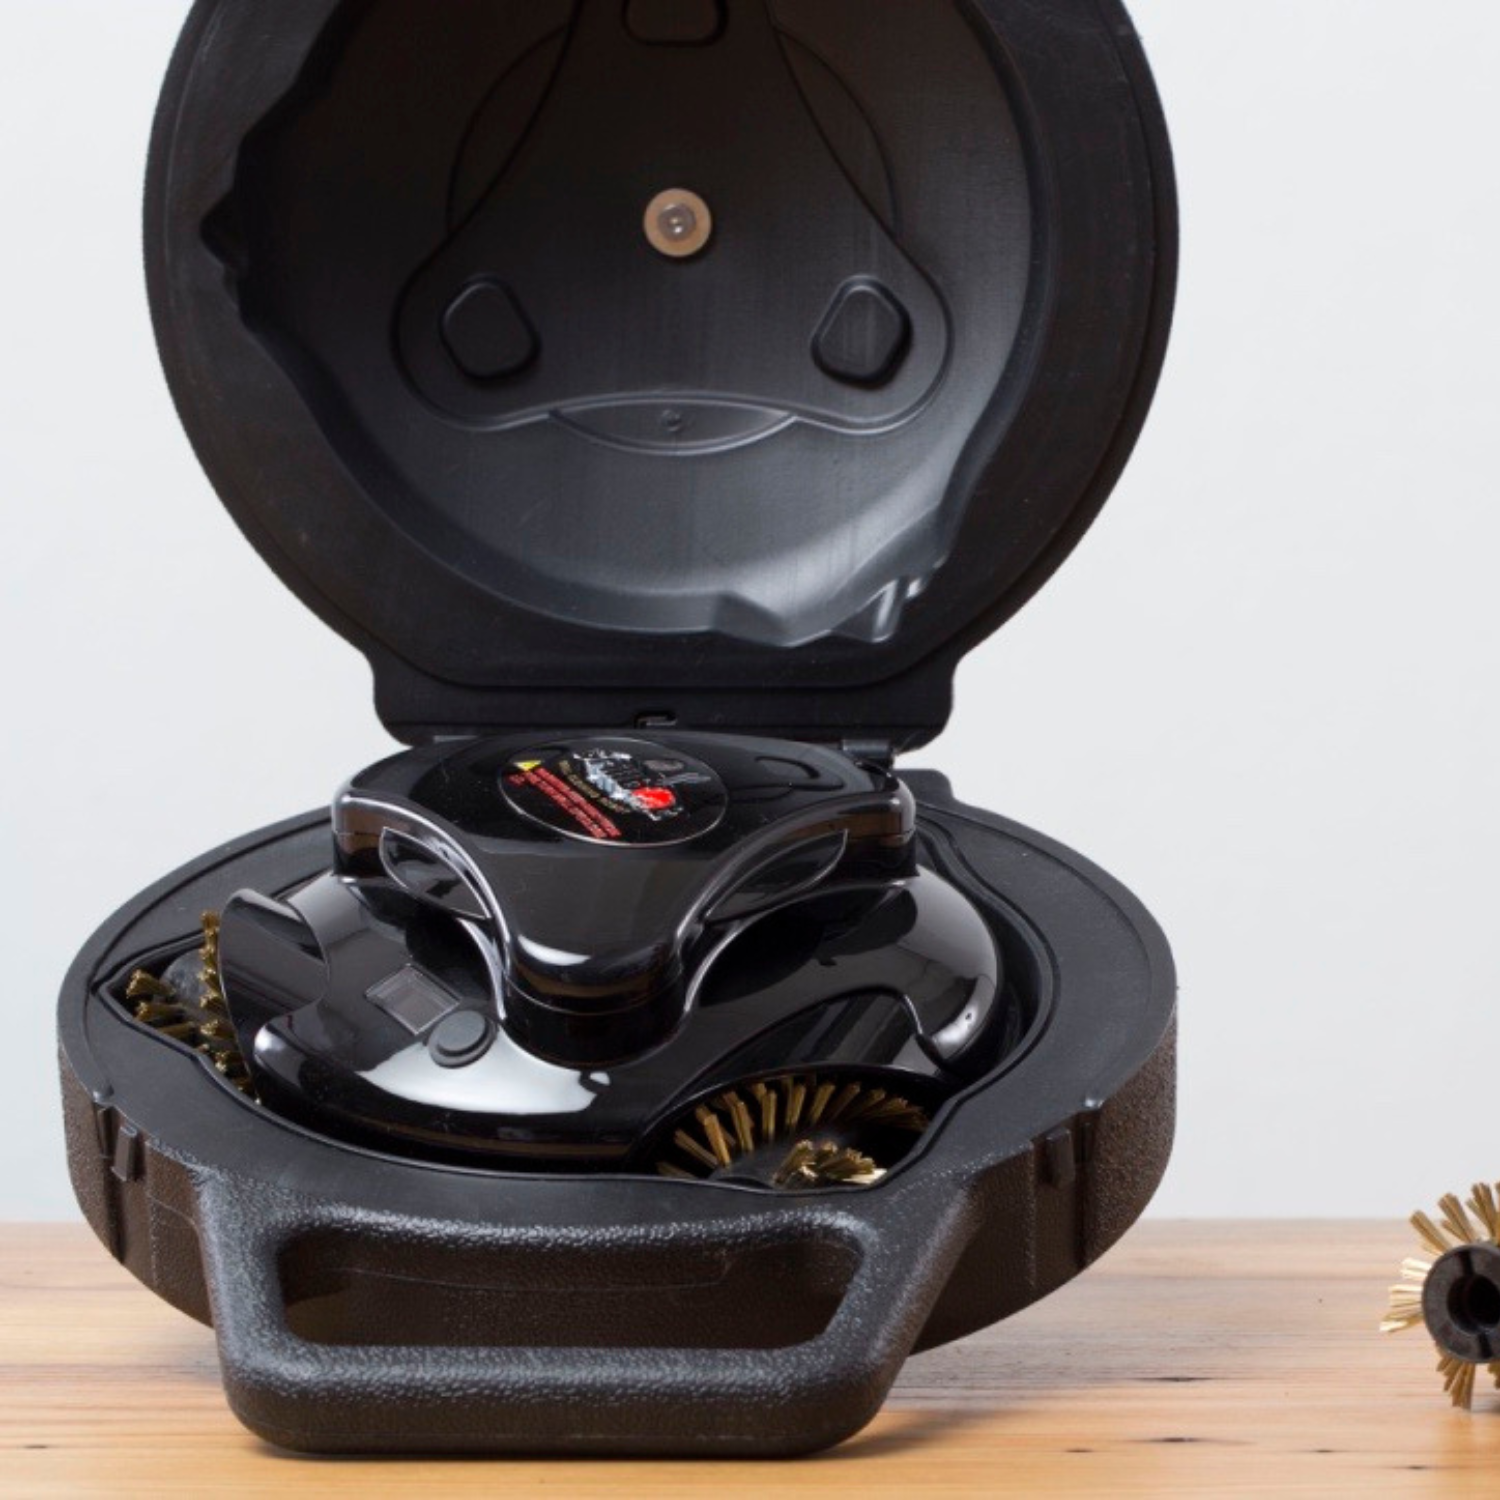 Buy Grillbot Automatic Grill Cleaning Robot - Black online Worldwide 